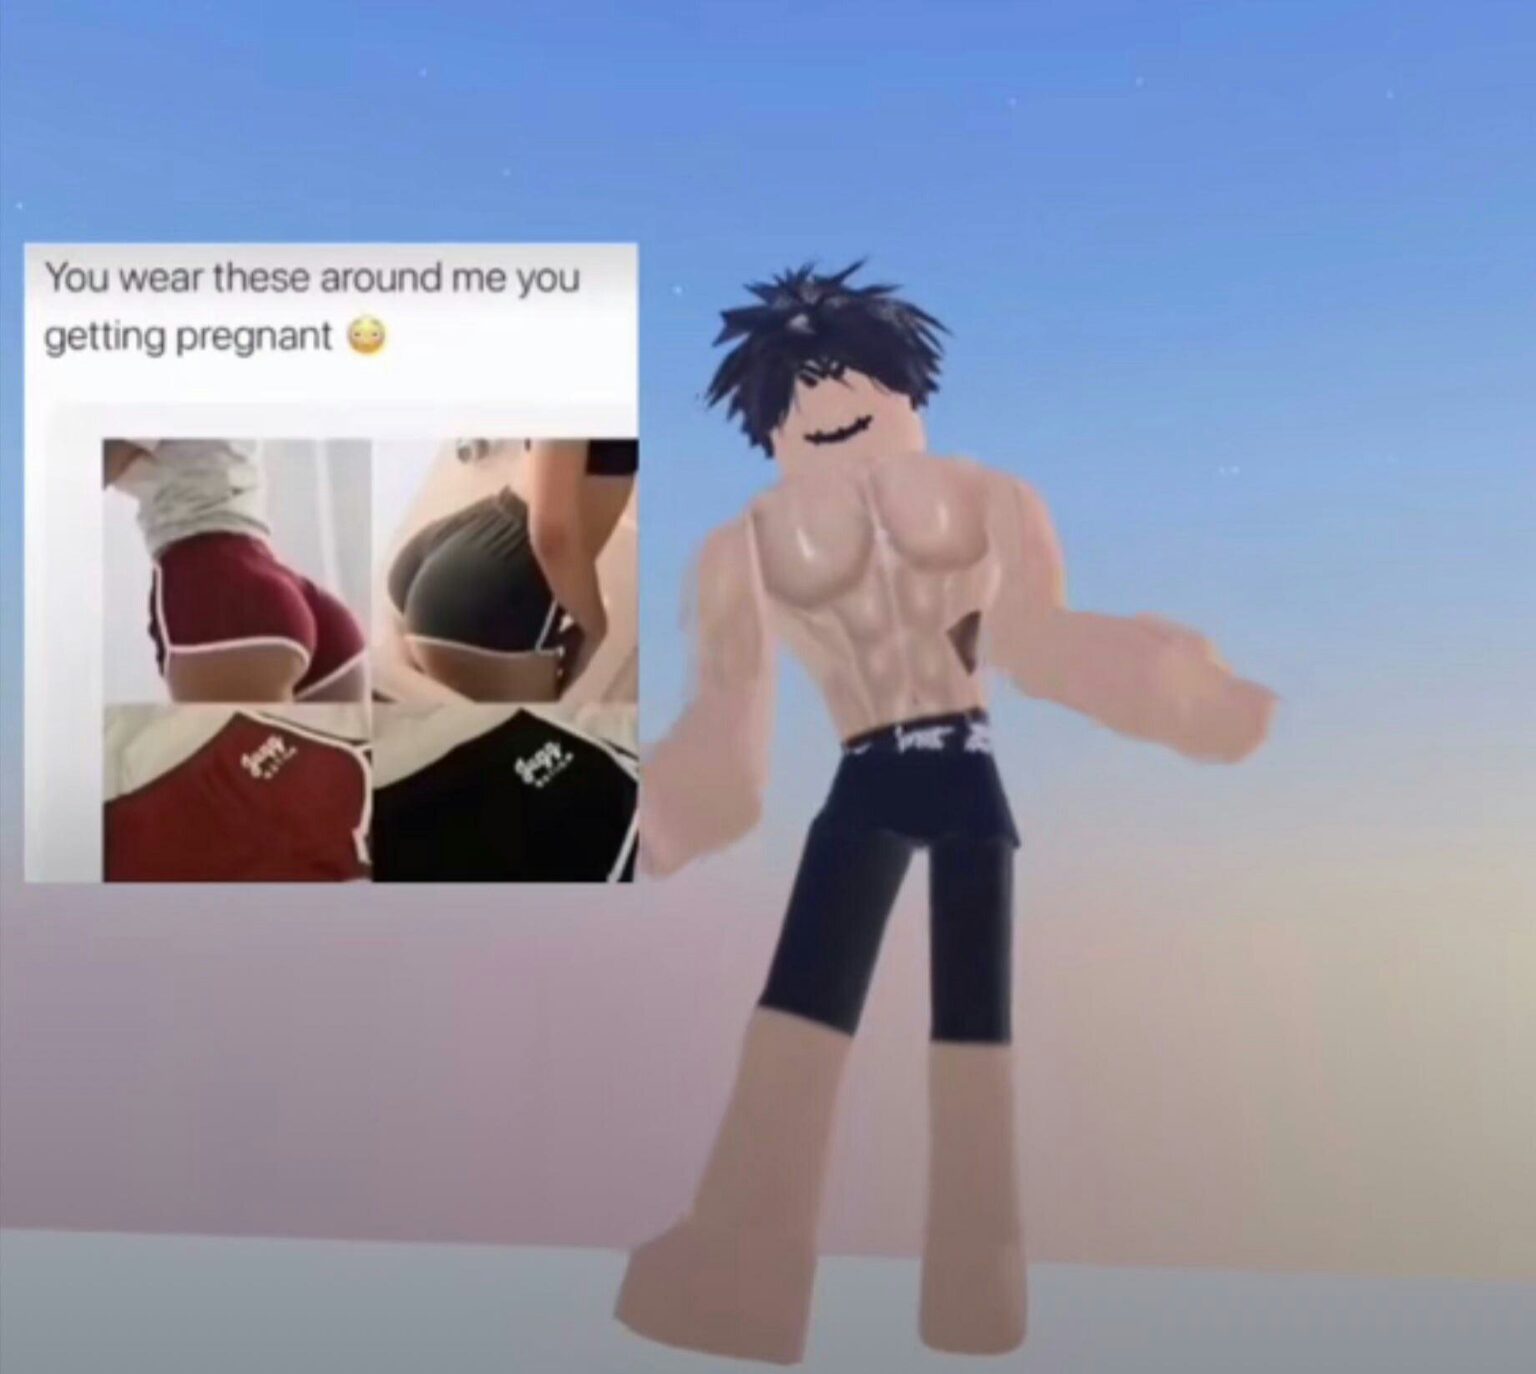 Roblox Meme Funny Clean Cursed Roblox Meme Of Gaming Pirate My Xxx